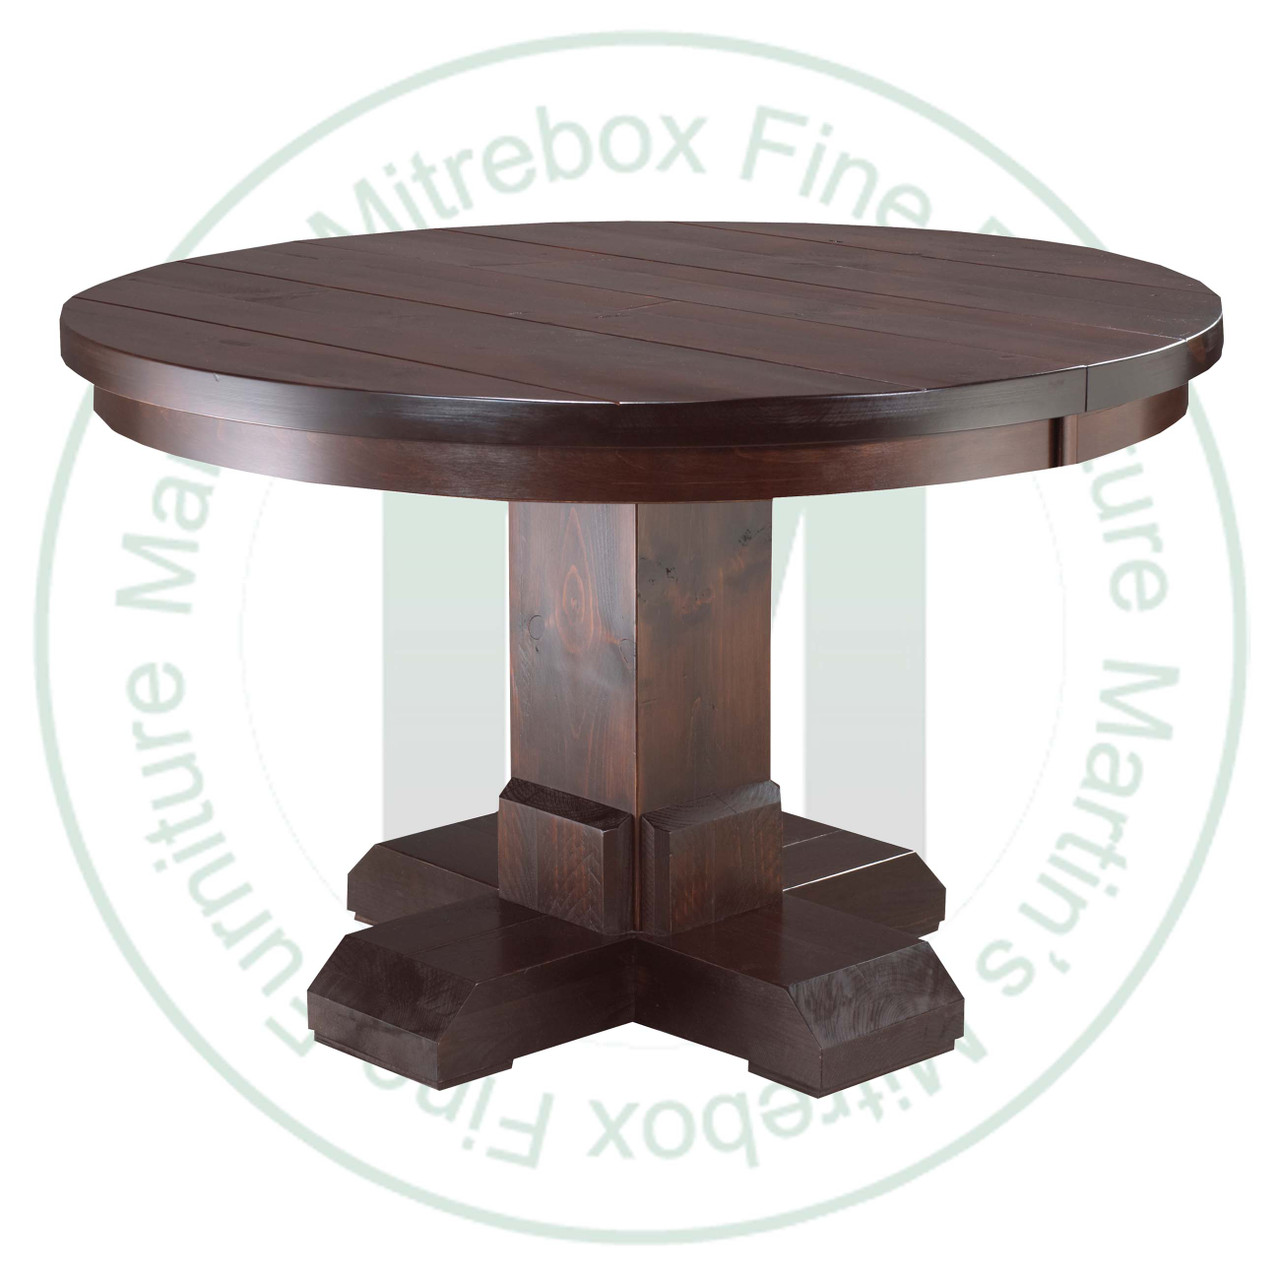 Maple Shrewsbury Single Pedestal Table 48''D x 48''W x 30''H Round Solid Table. Table Has 1.25'' Thick Top.